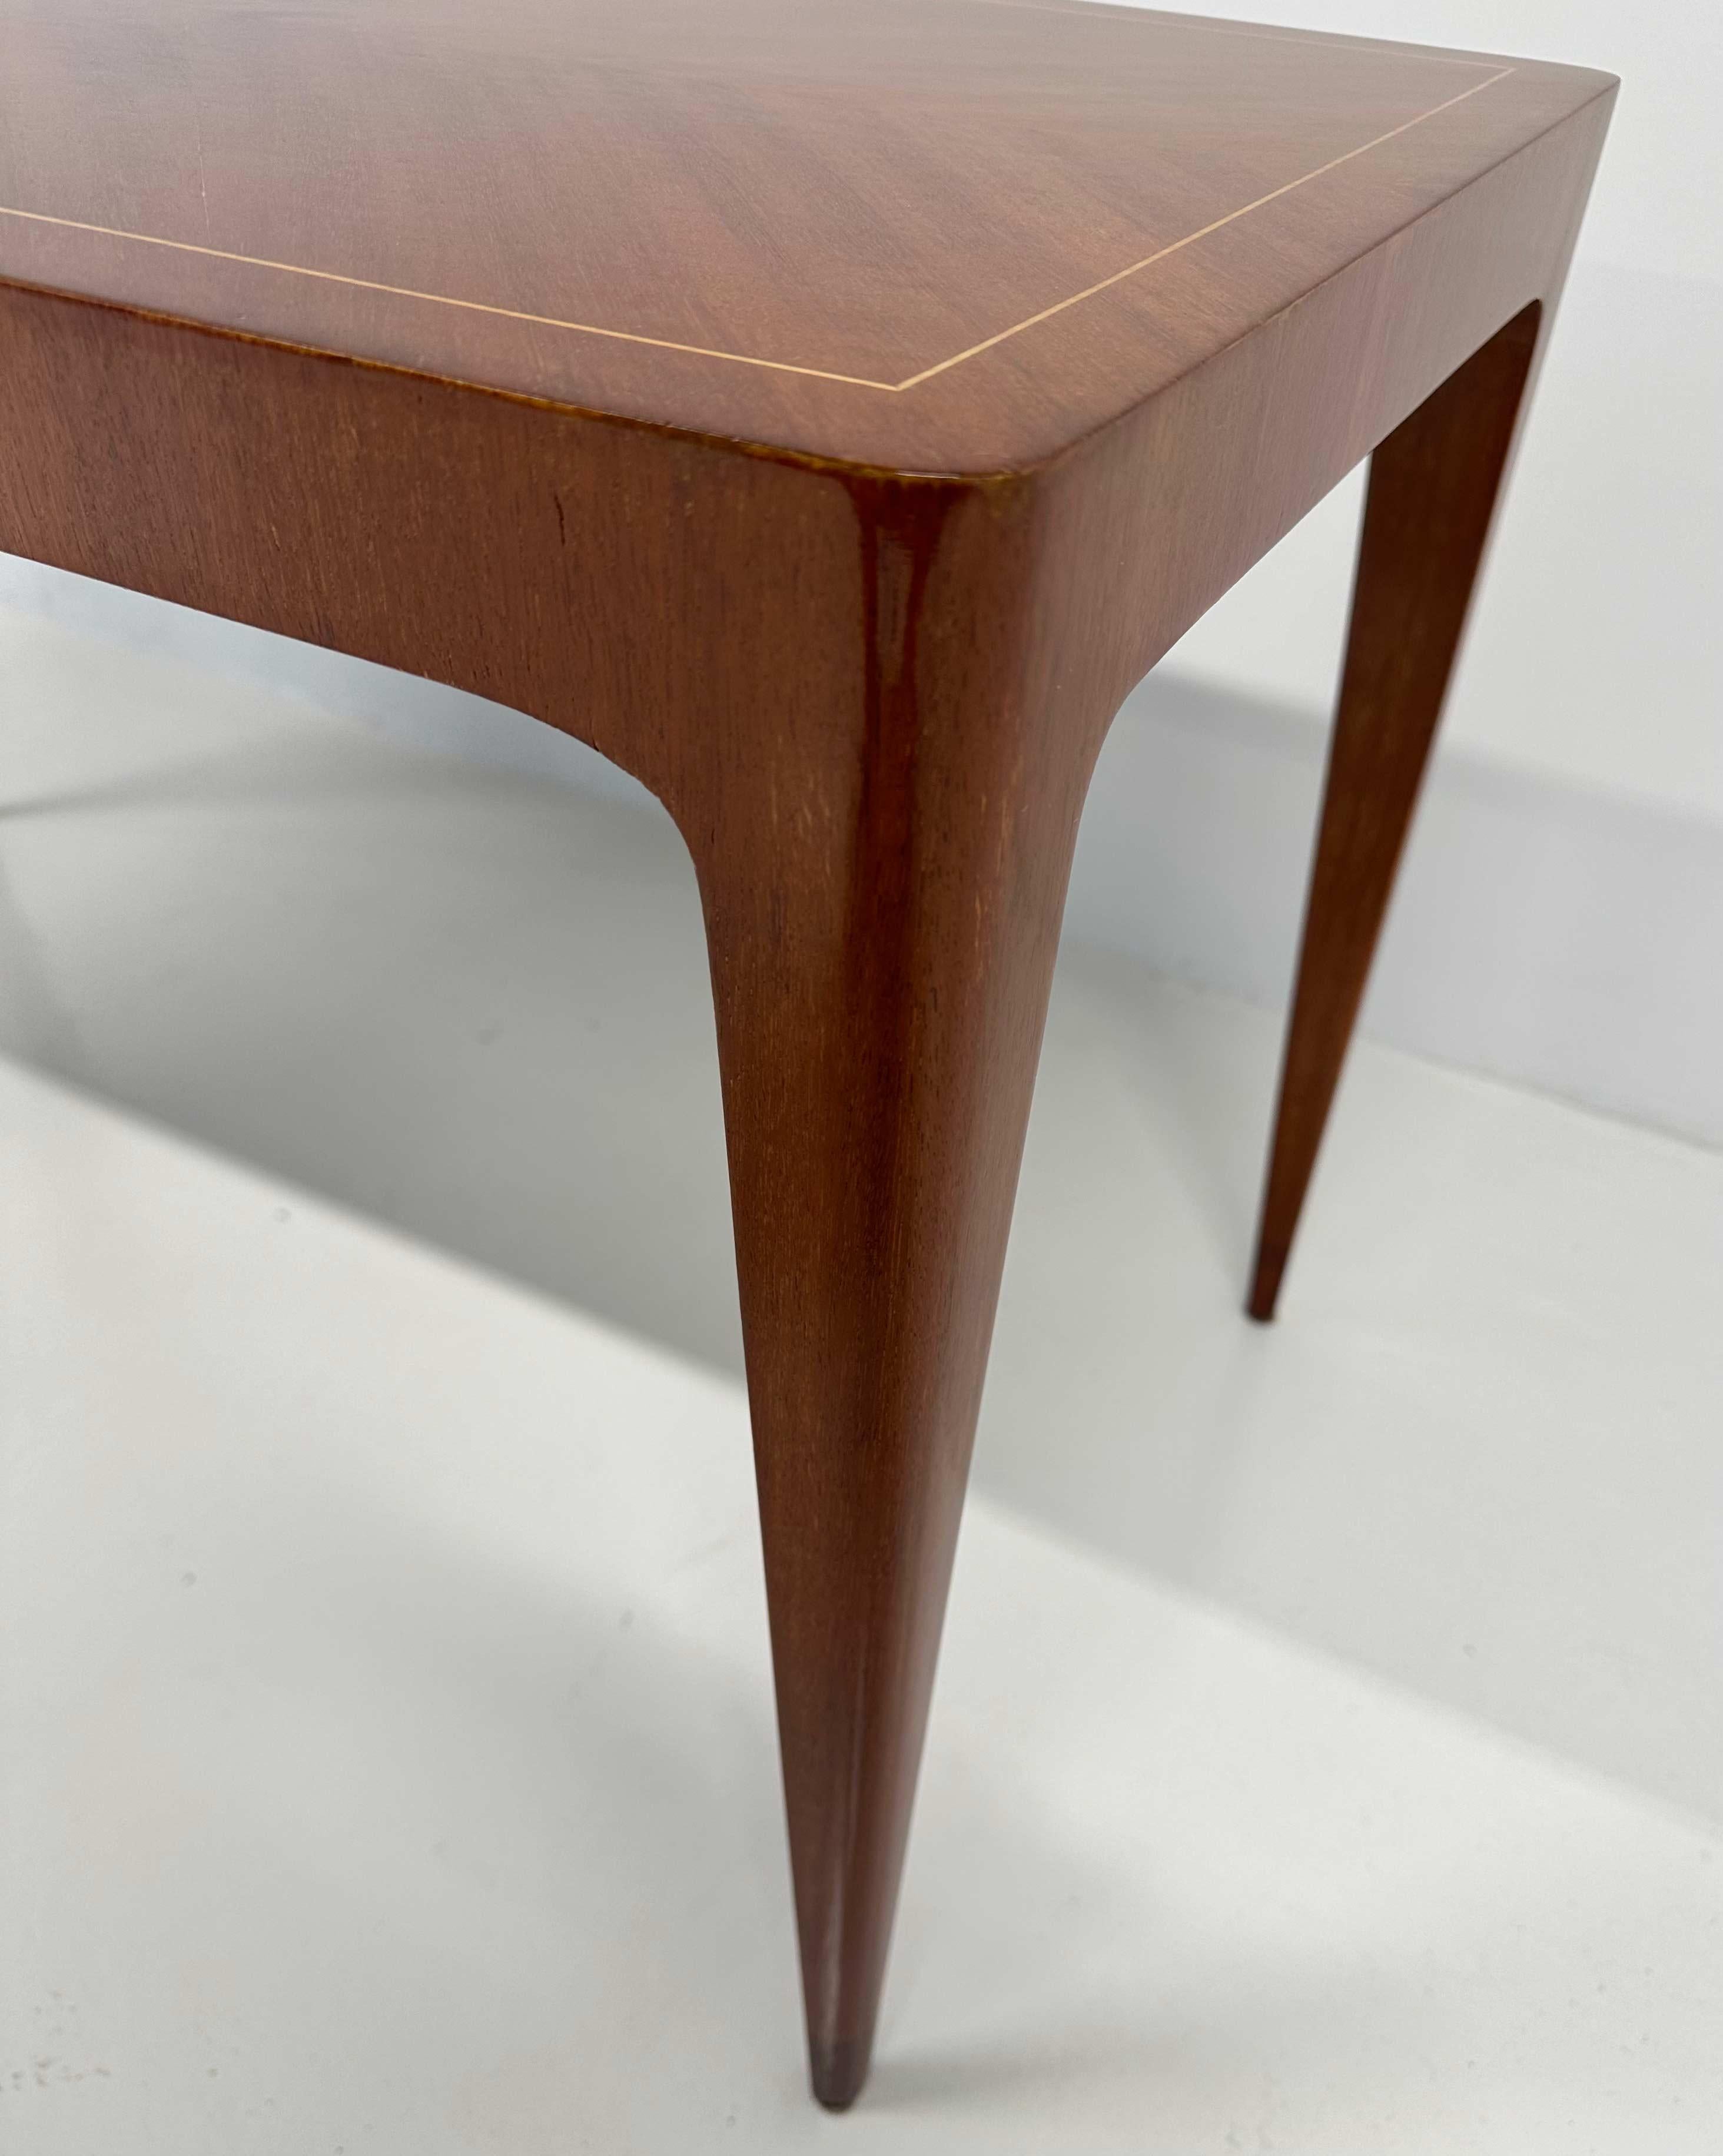 Italian Art Deco Teak and Maple Coffee Table By Paolo Buffa , 1950s For Sale 4